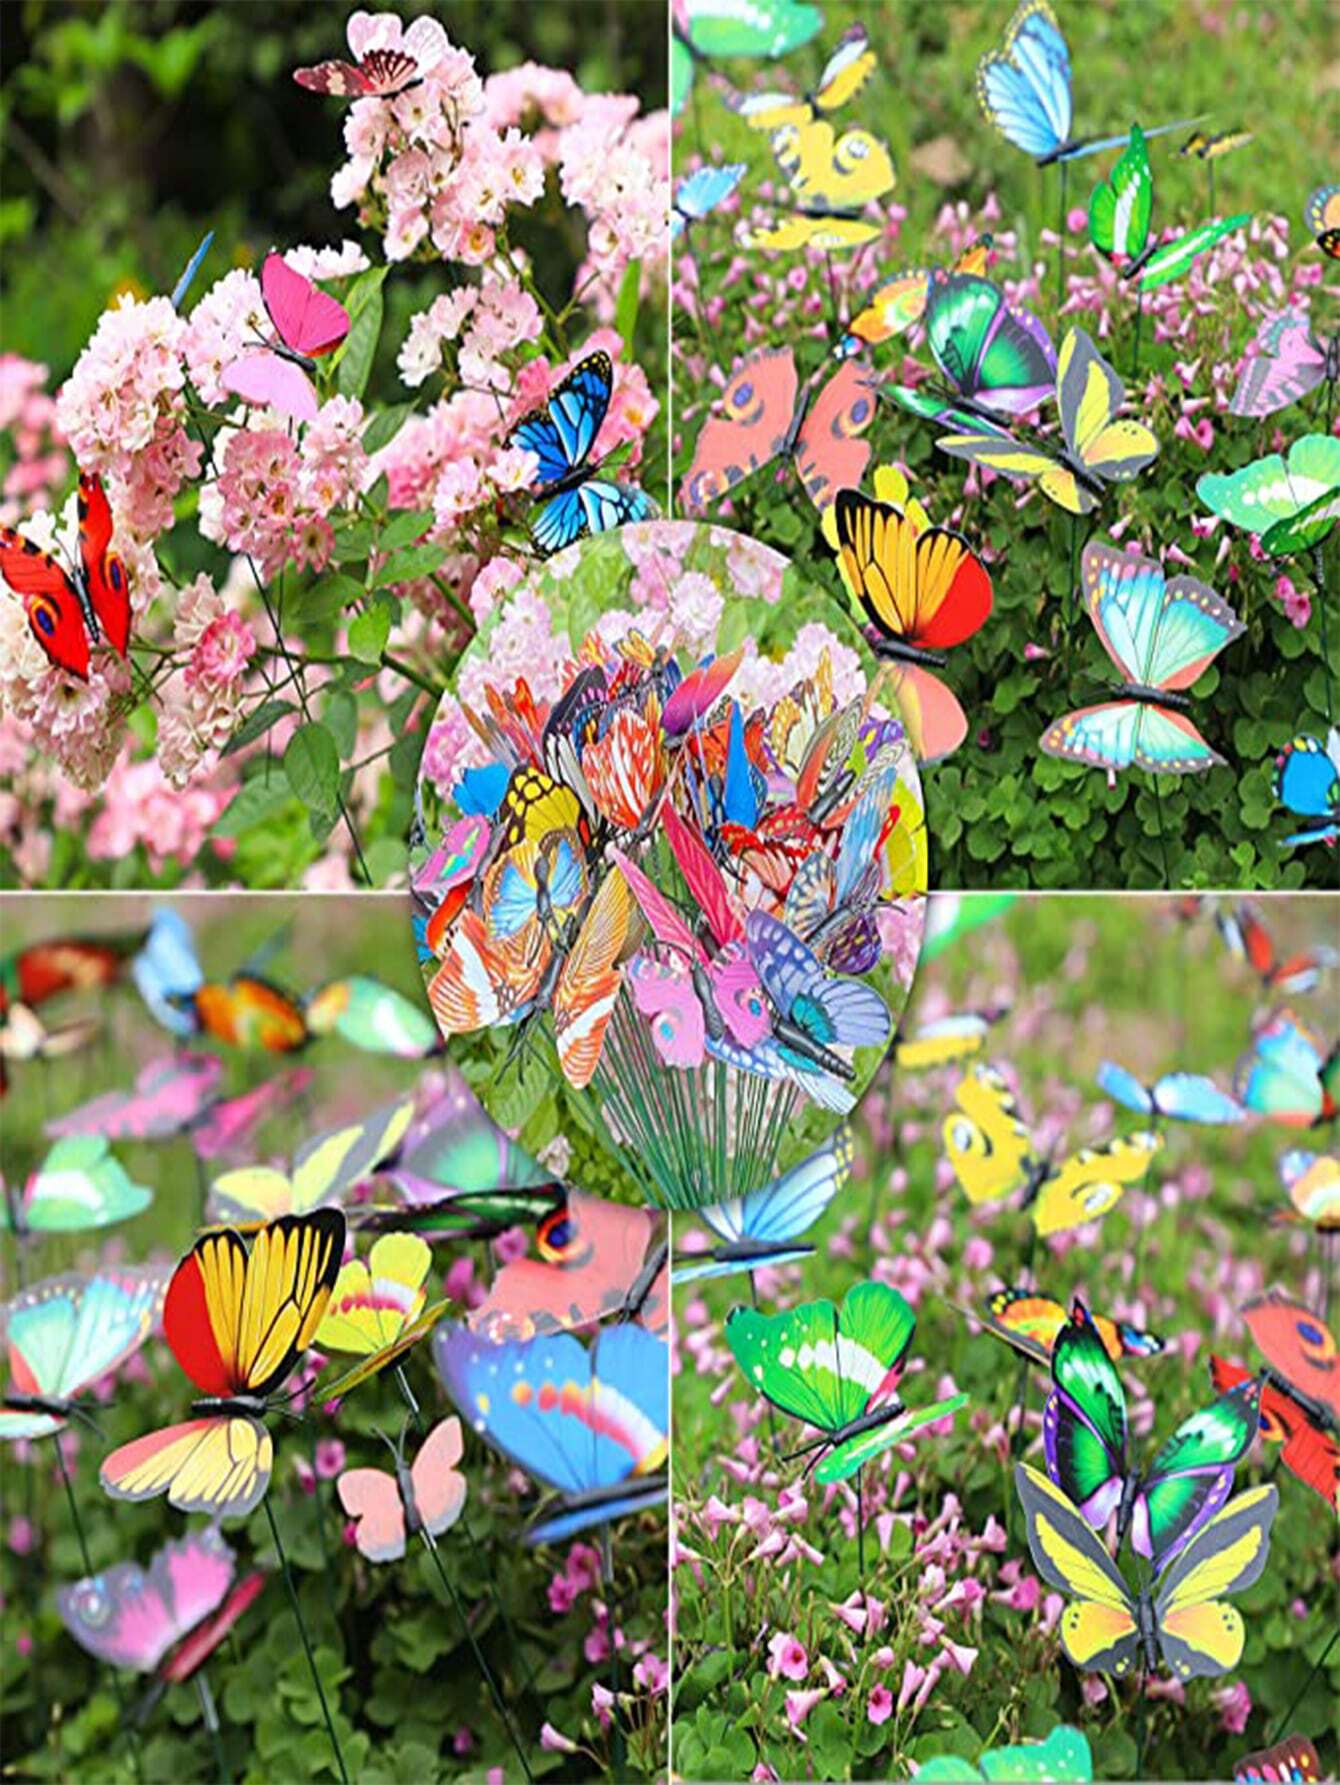 10pcs Glow In The Dark Random Color Decorative Garden Stake, Butterfly Garden Decoration For Household